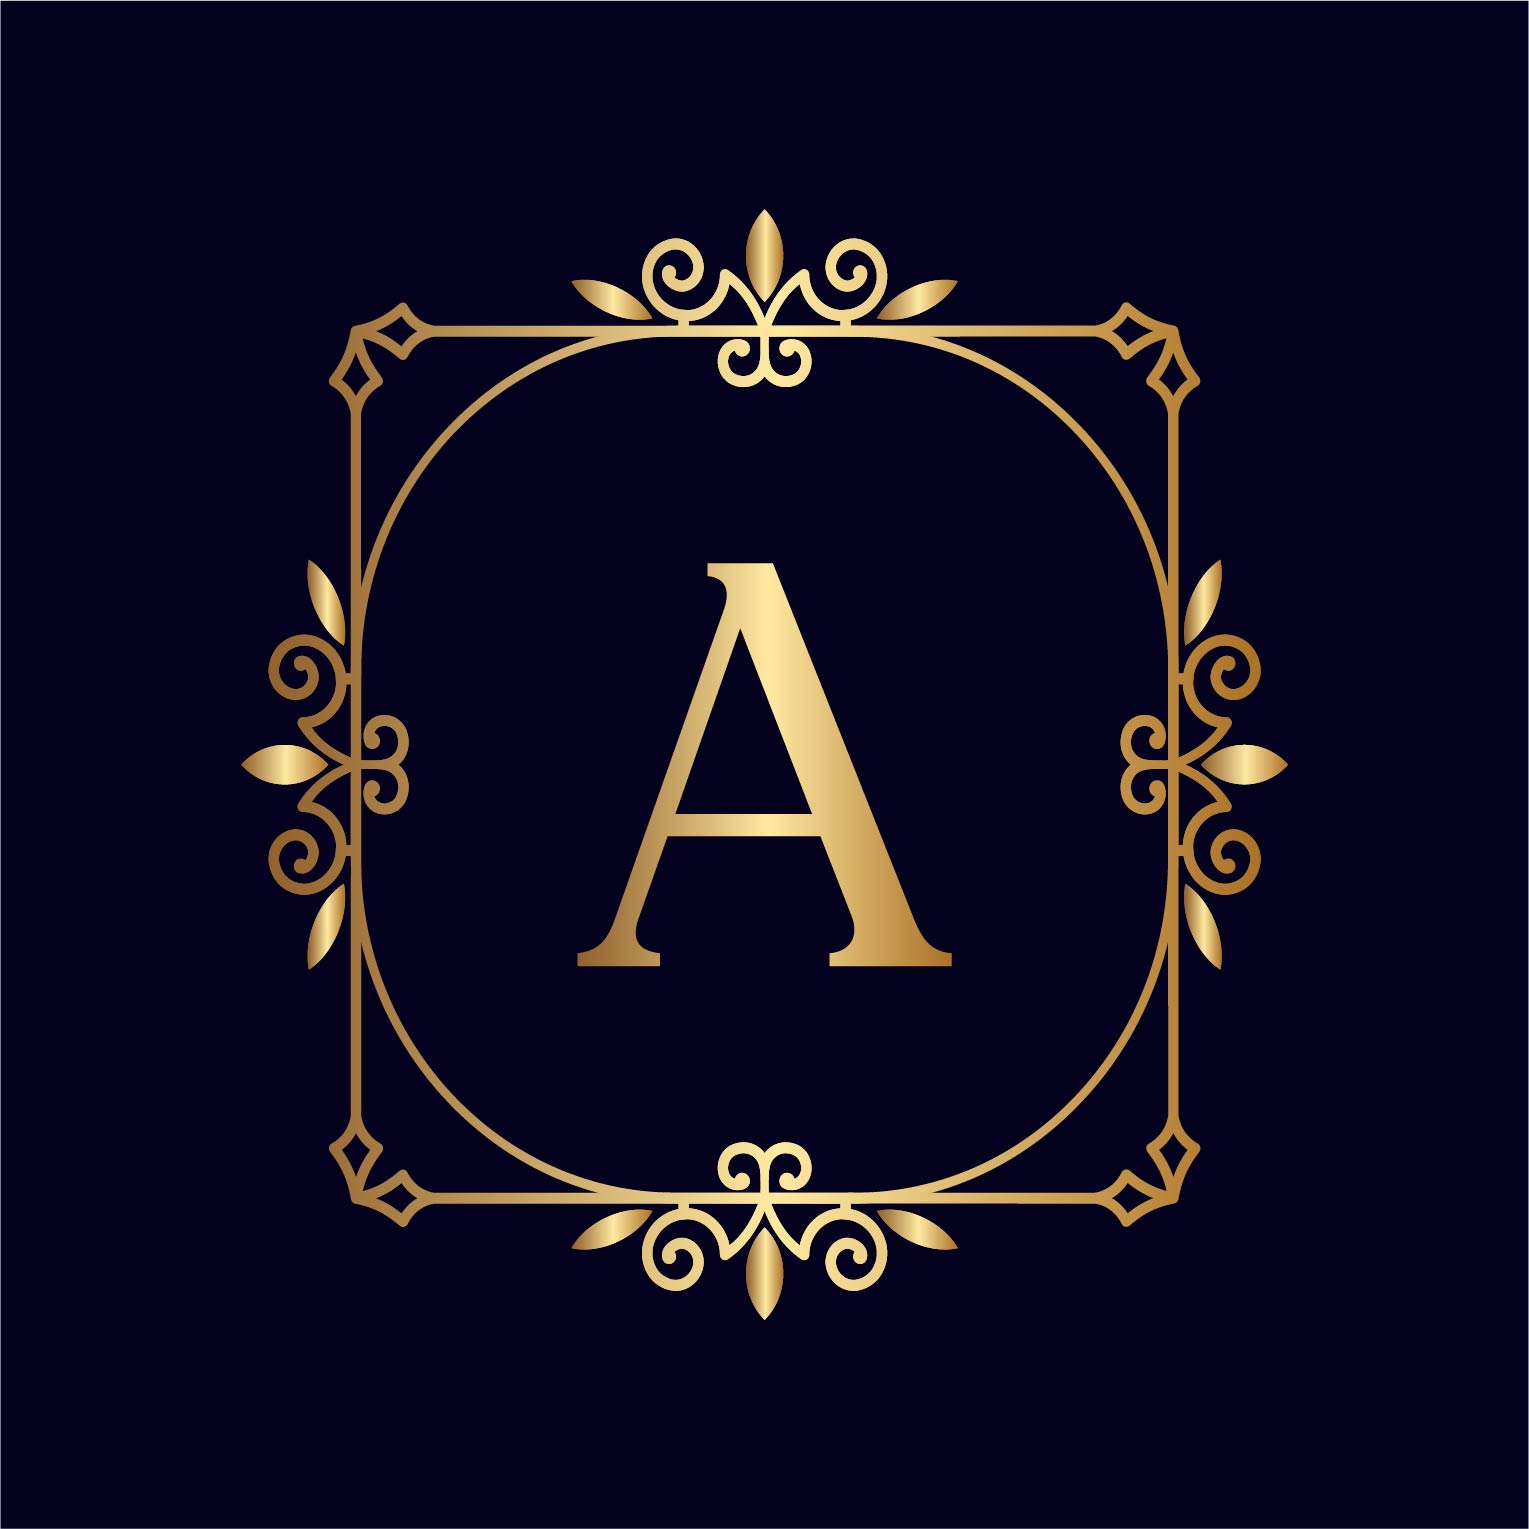 gold letter a